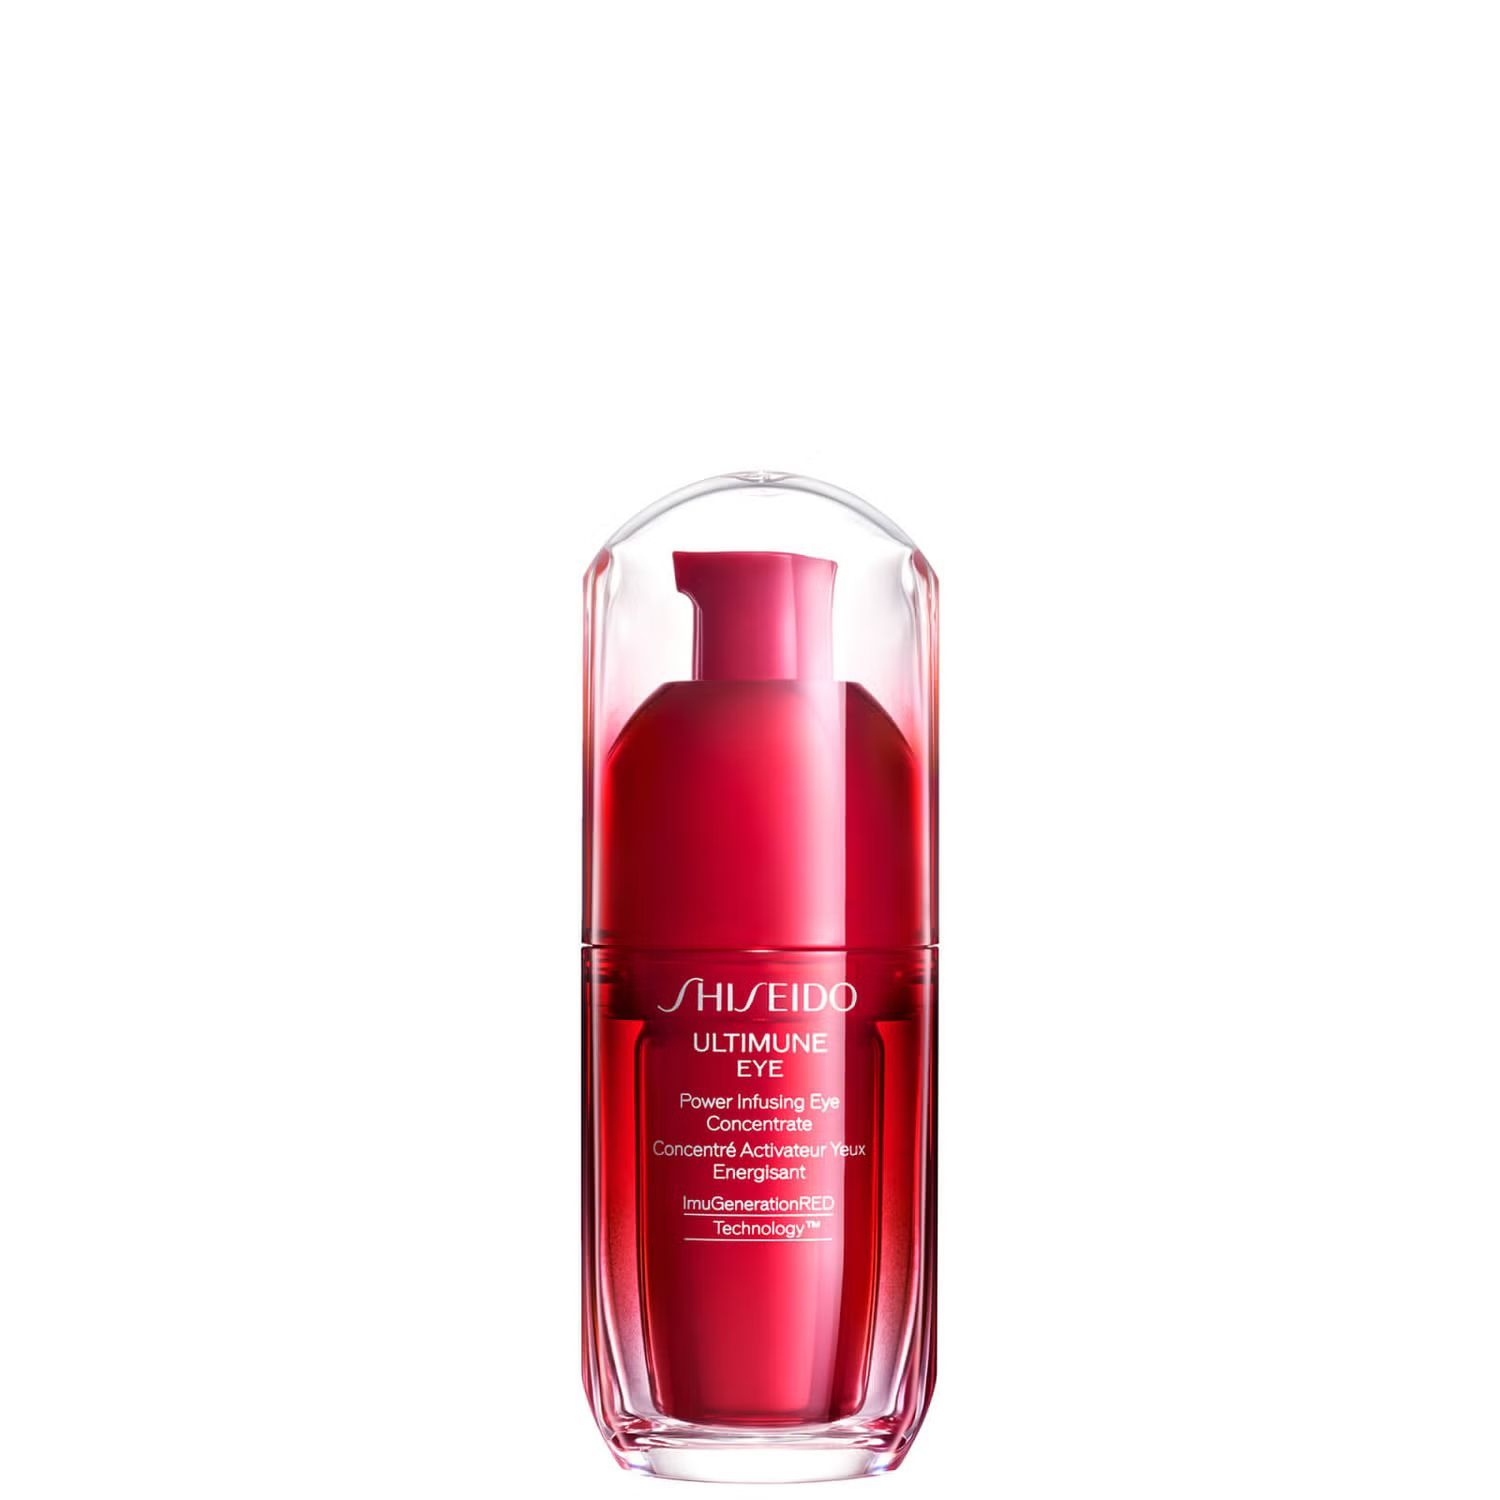 Shiseido Exclusive Ultimune Power Infusing Eye Concentrate 15ml | Cult Beauty